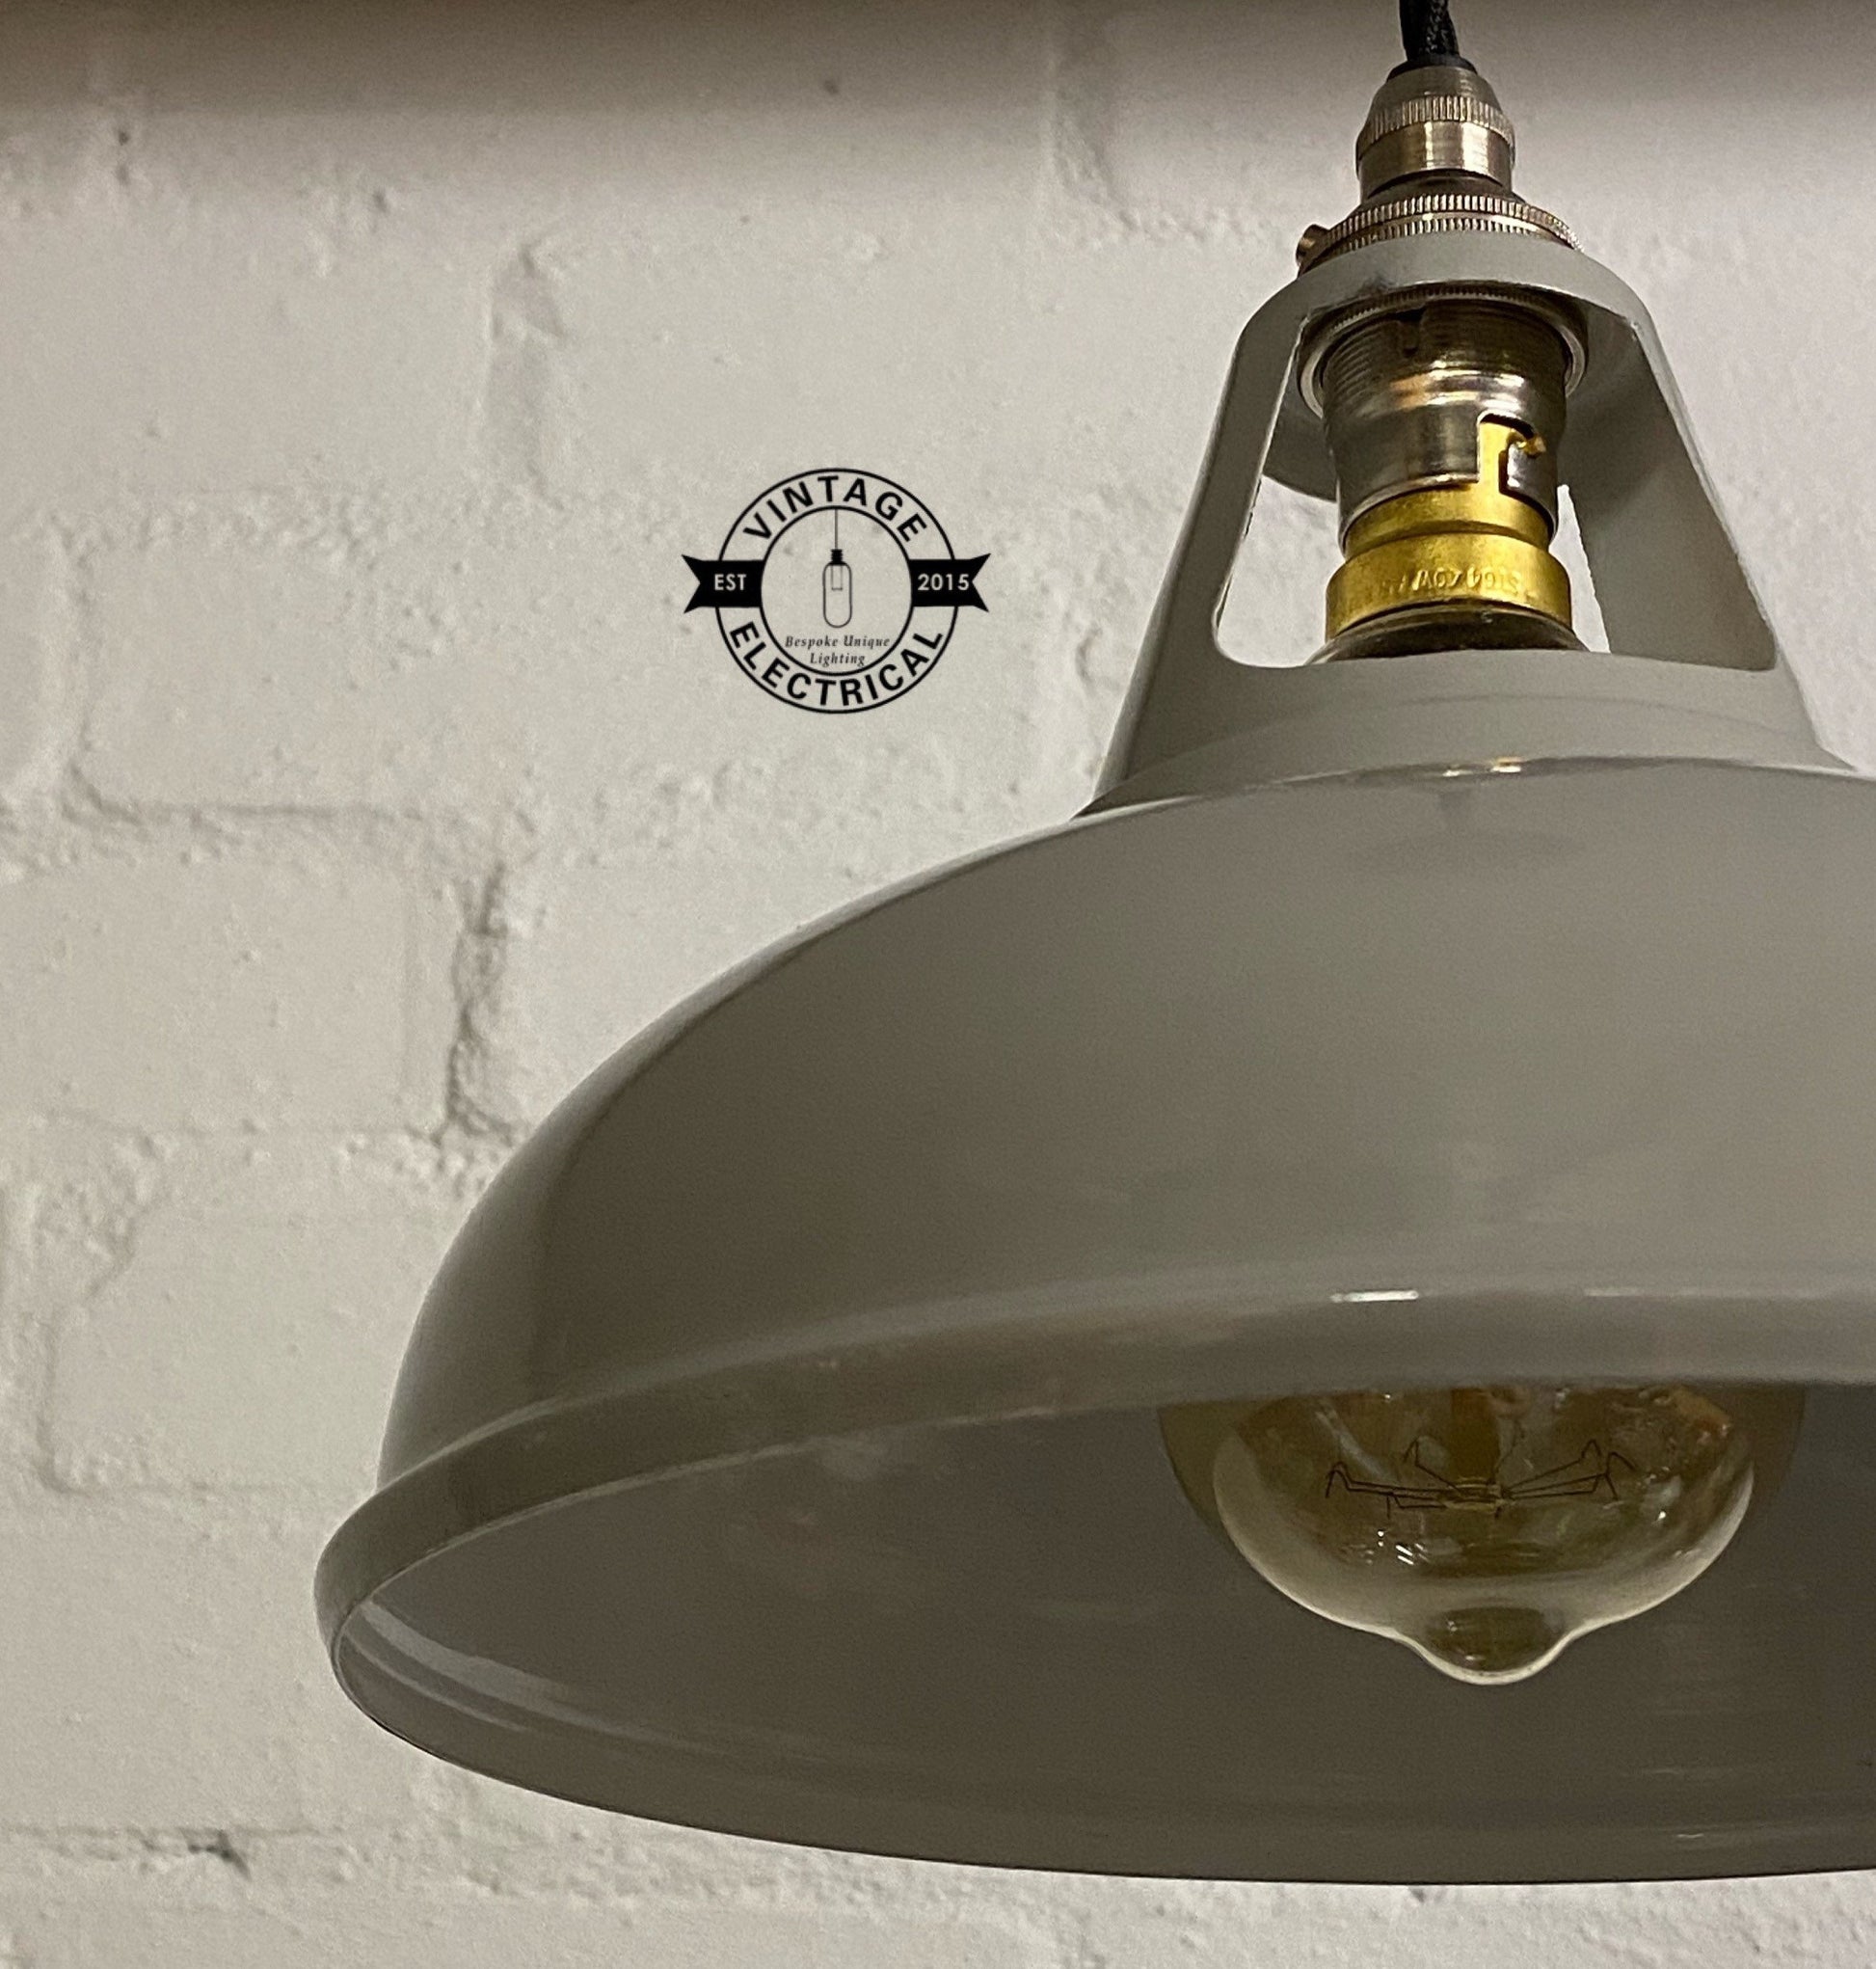 Cawston ~ Original Grey Solid Industrial Coolicon Shade Pendant Set Light | Ceiling Dining Room | Kitchen Table | Vintage 1 x Filament Bulb